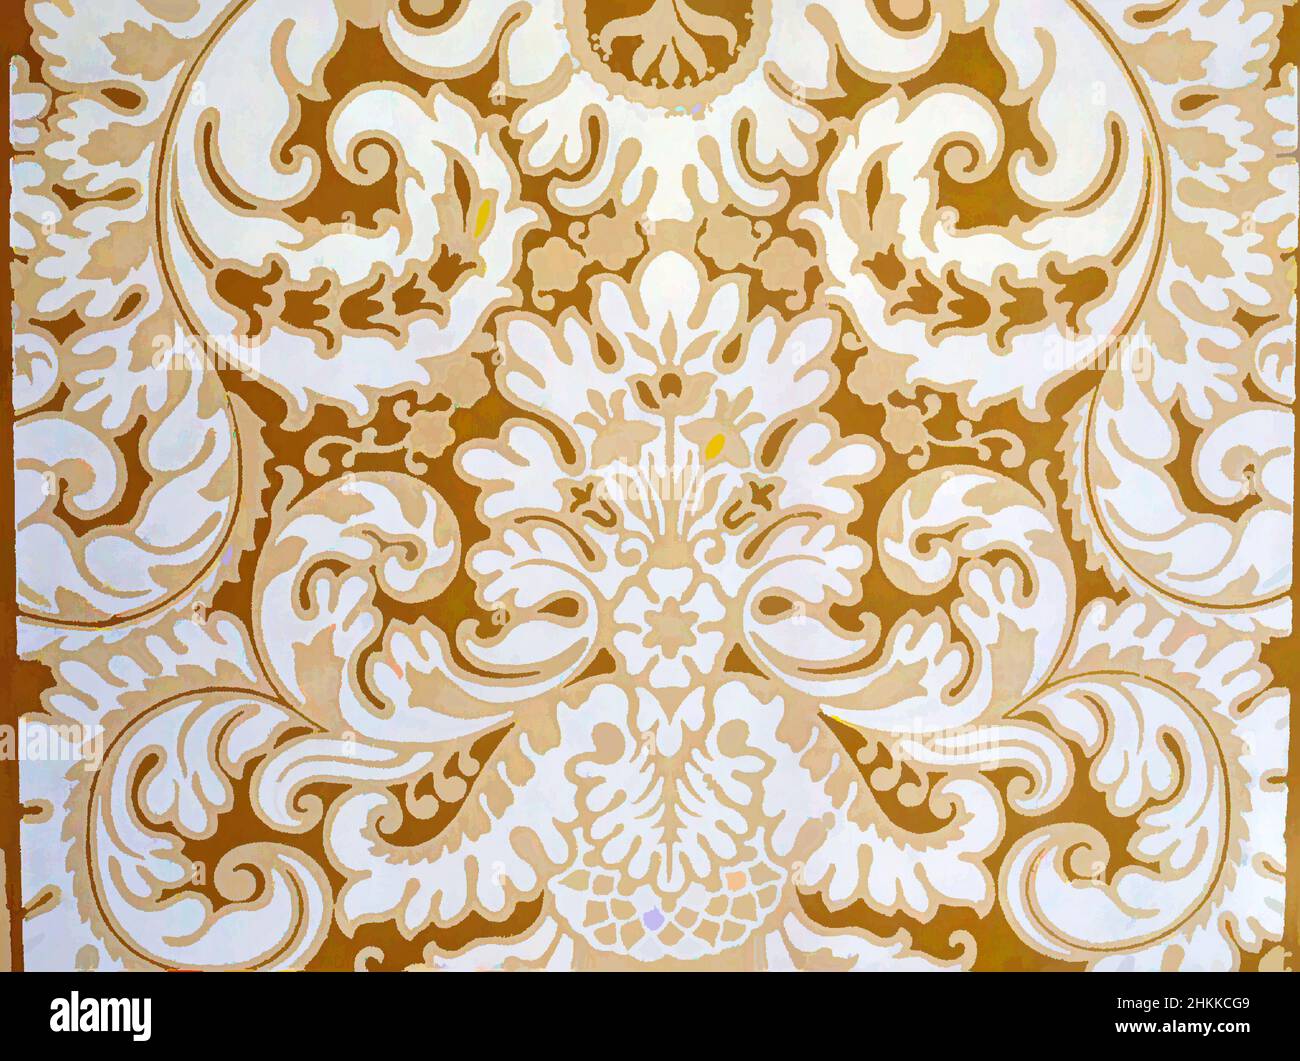 Art inspired by Wallpaper, Paper, ca. 1900, 21 1/4 x 22 1/4 in., 54.0 x 57.2 cm, Classic works modernized by Artotop with a splash of modernity. Shapes, color and value, eye-catching visual impact on art. Emotions through freedom of artworks in a contemporary way. A timeless message pursuing a wildly creative new direction. Artists turning to the digital medium and creating the Artotop NFT Stock Photo